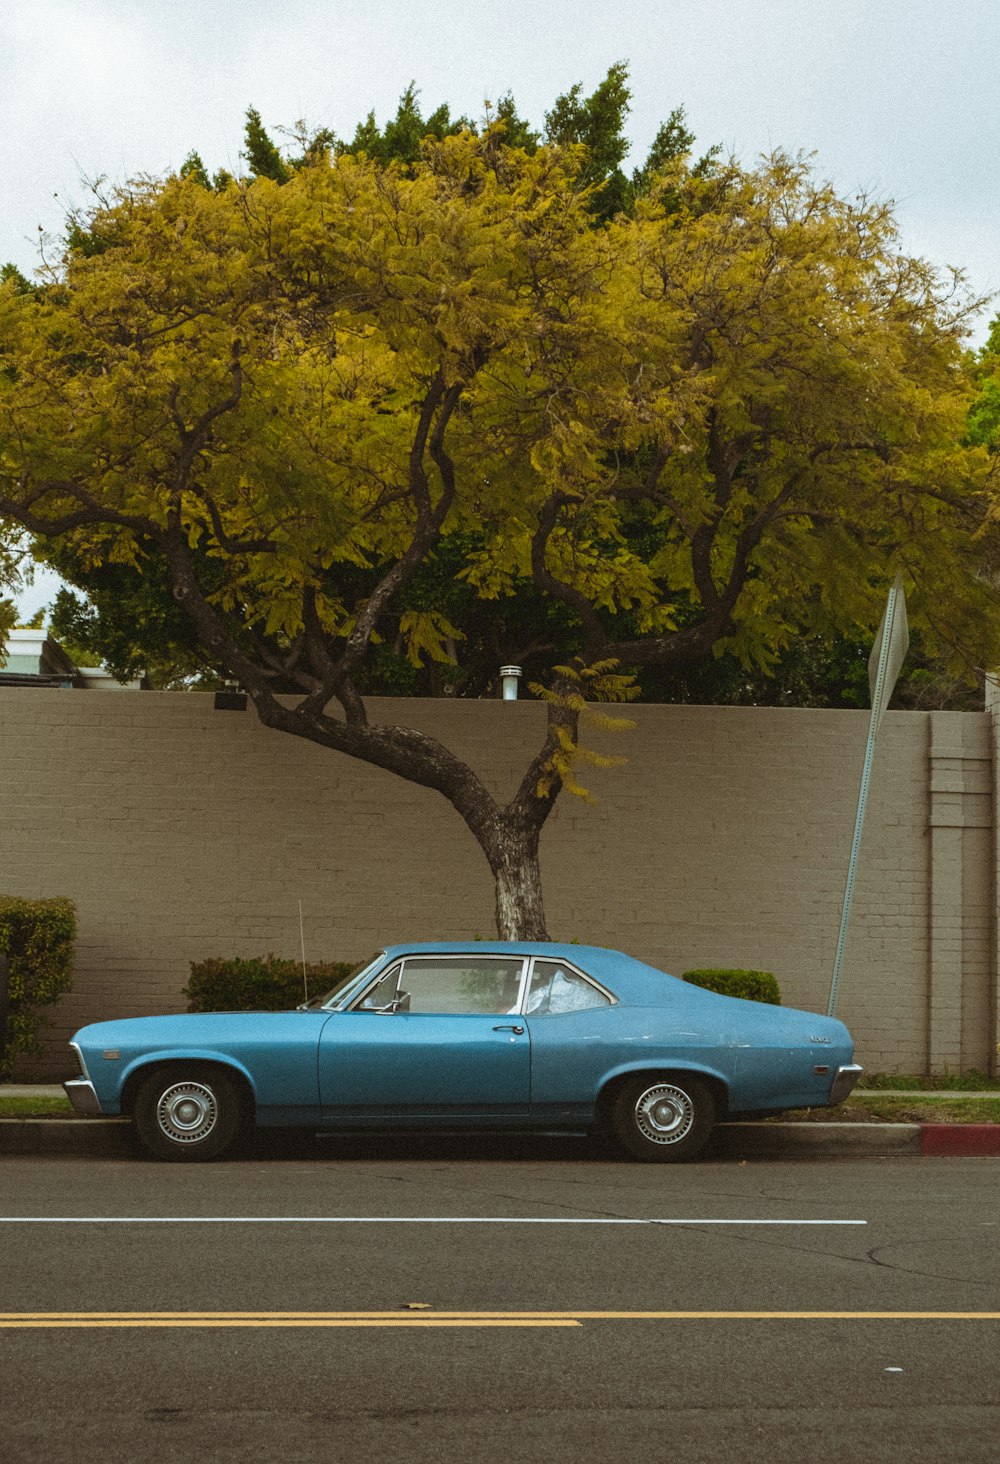 classic teal coupe parked at the side of the road beside tree